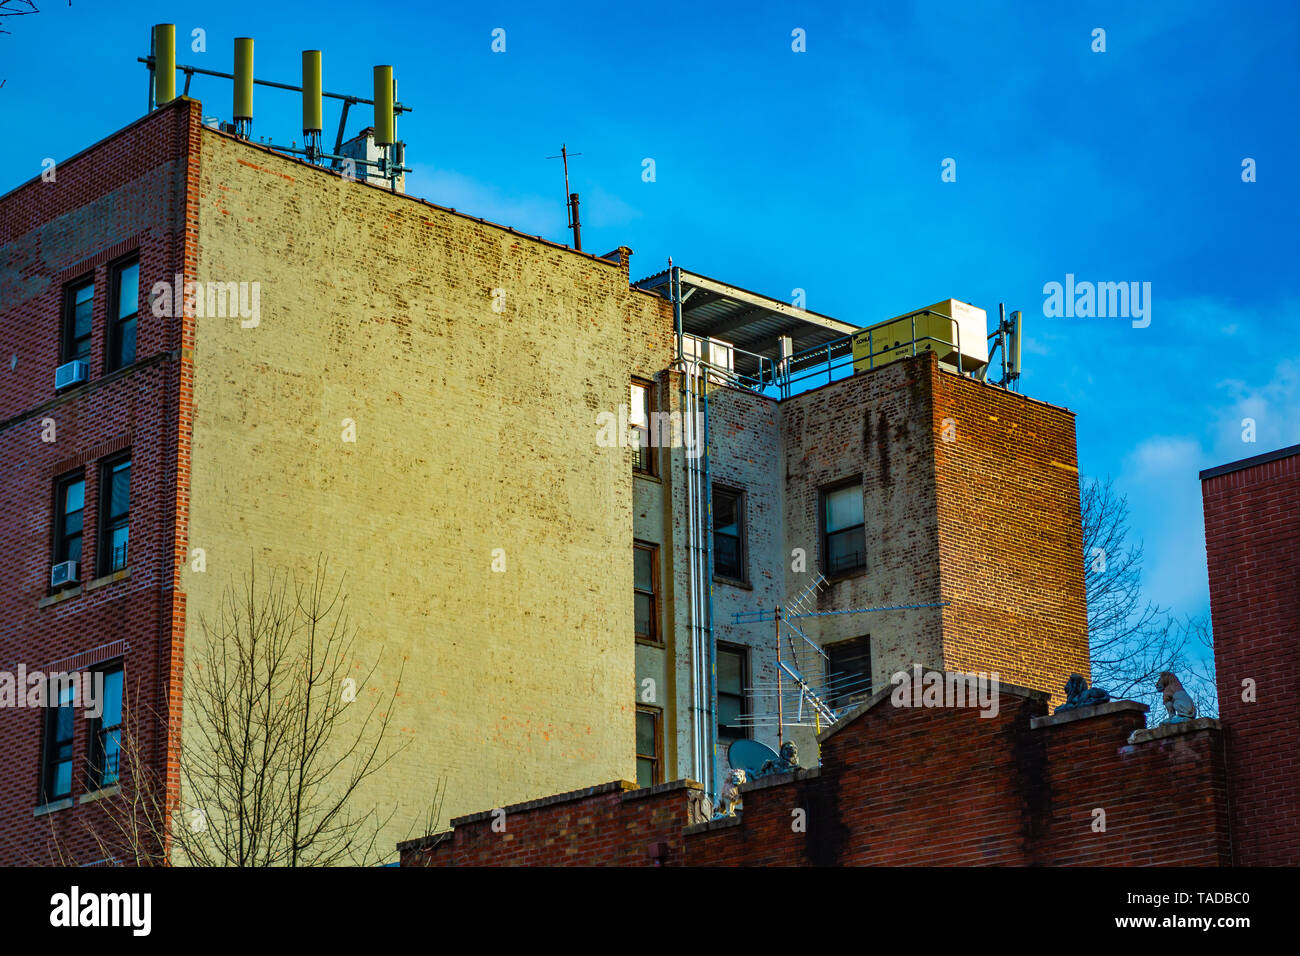 Brooklyn apartment building with cellular antennas on the roof. Stock Photo